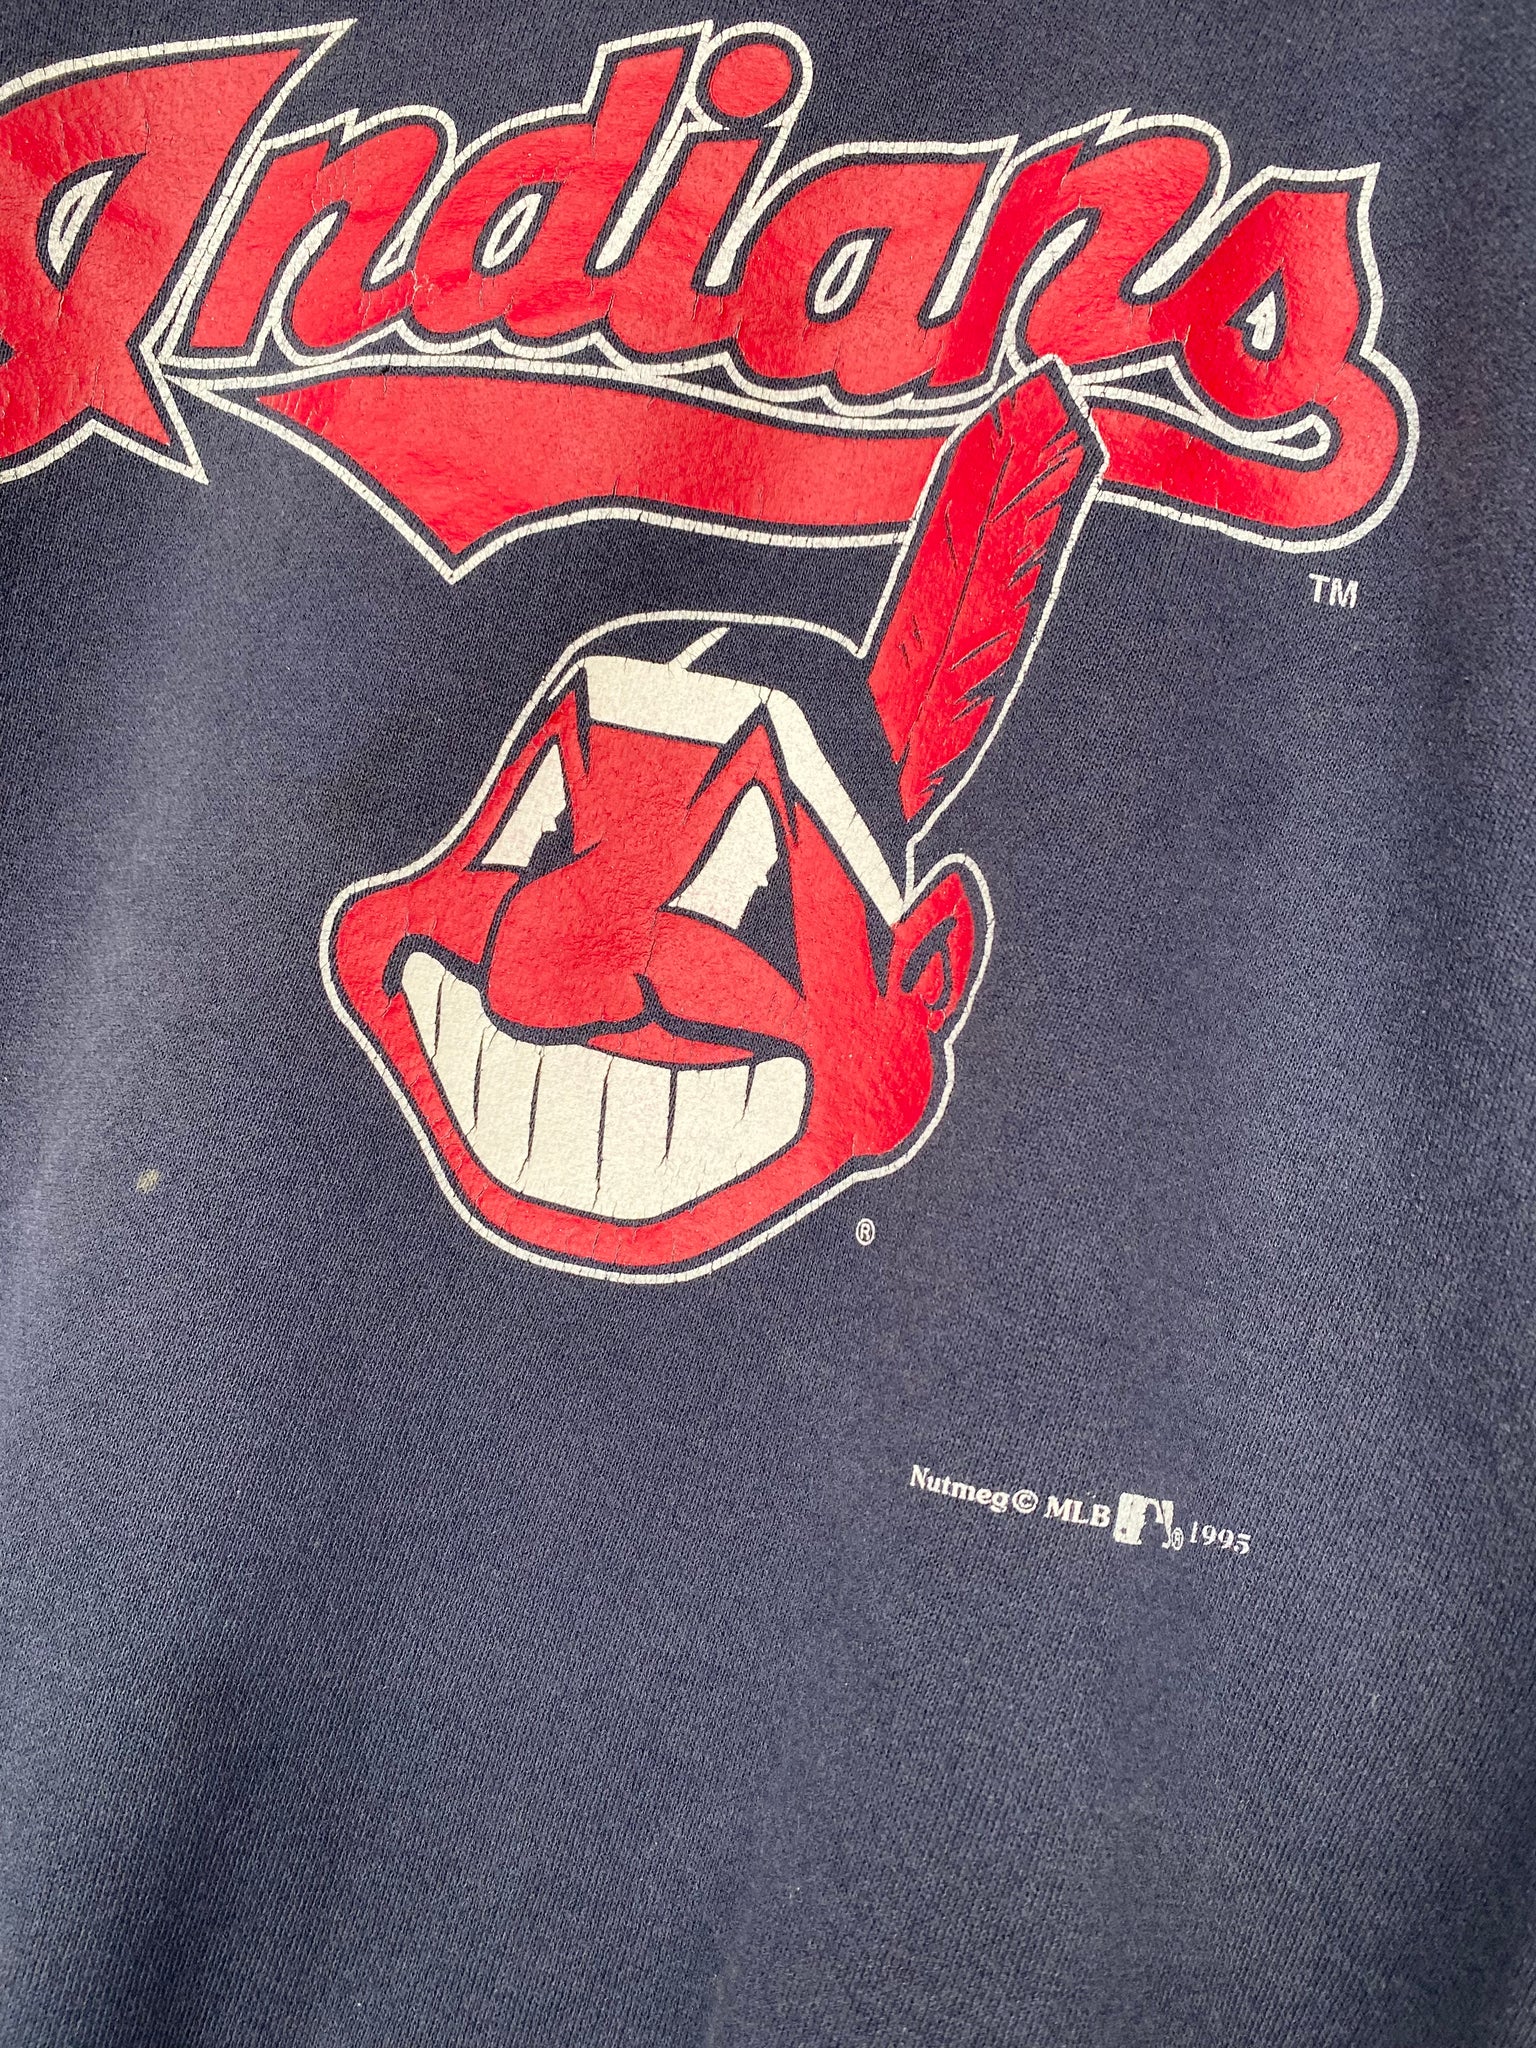 CLEVELAND INDIANS T Shirt CHIEF WAHOO Vintage MAJESTIC Small Grey